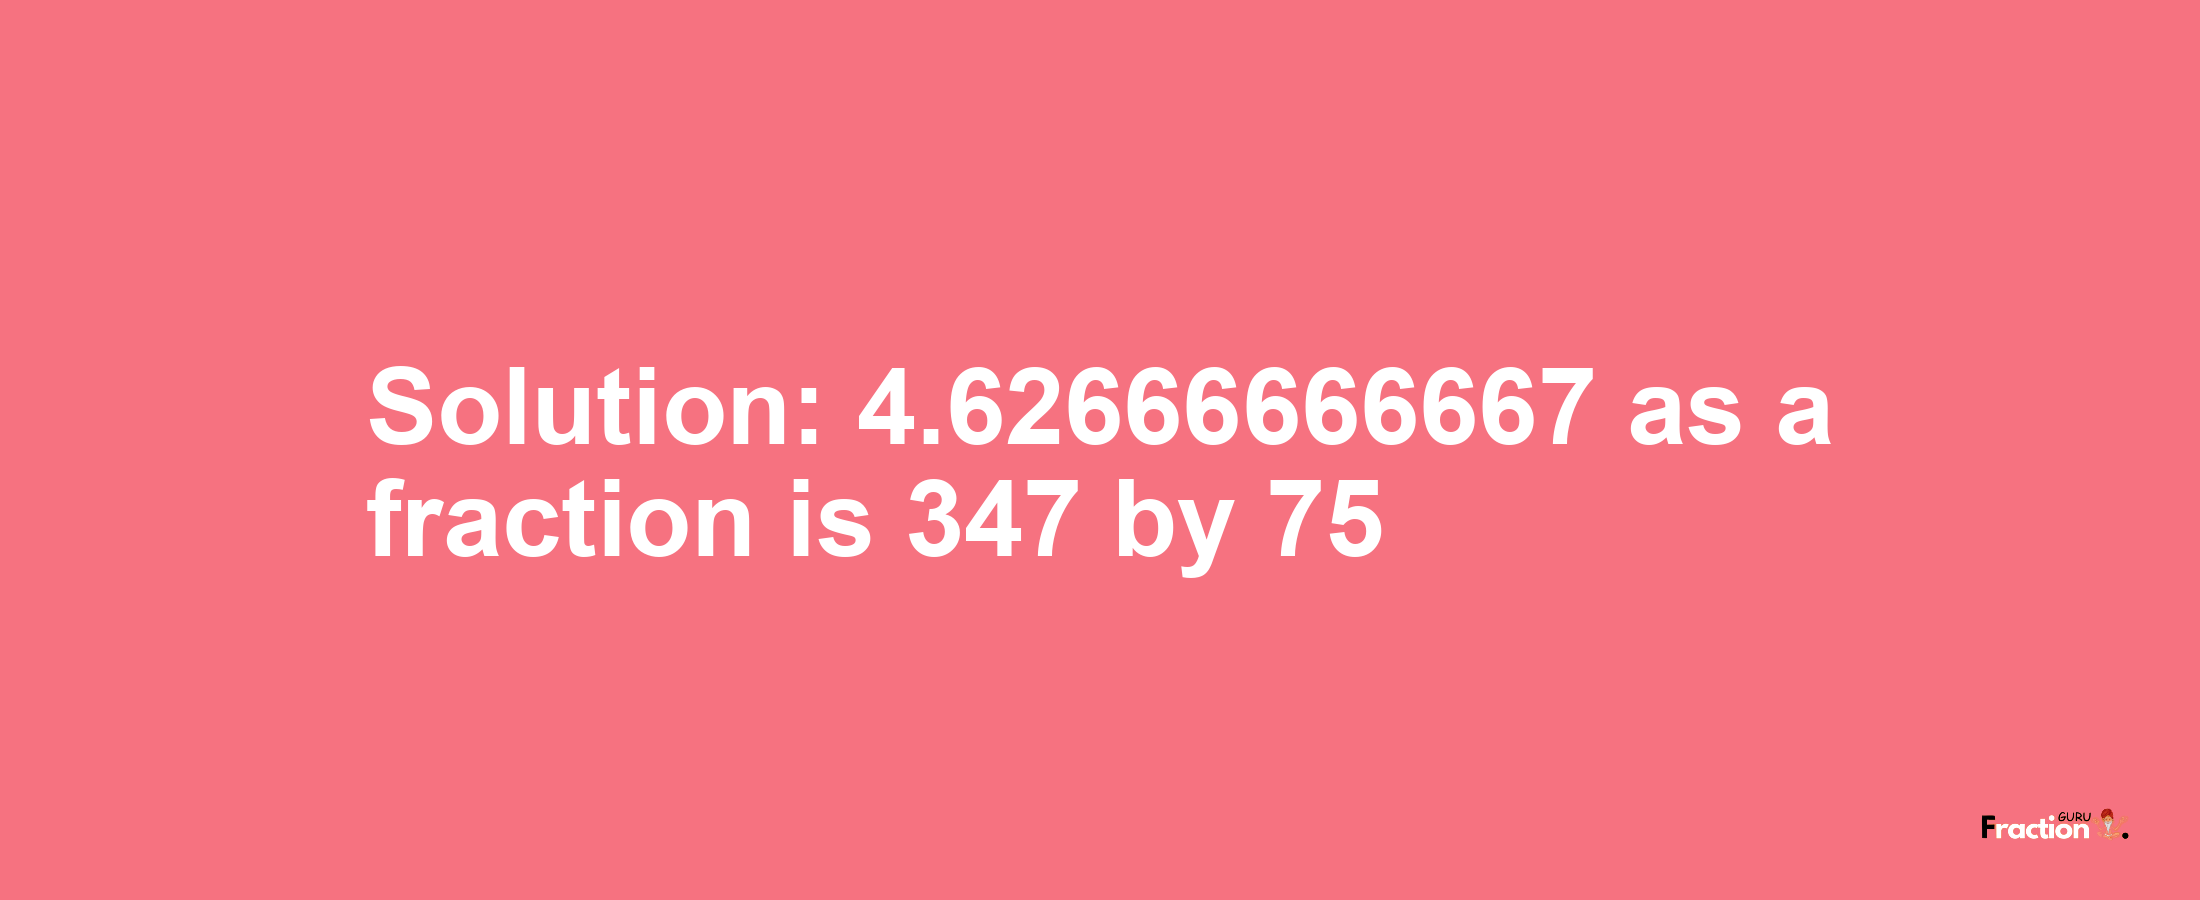 Solution:4.62666666667 as a fraction is 347/75